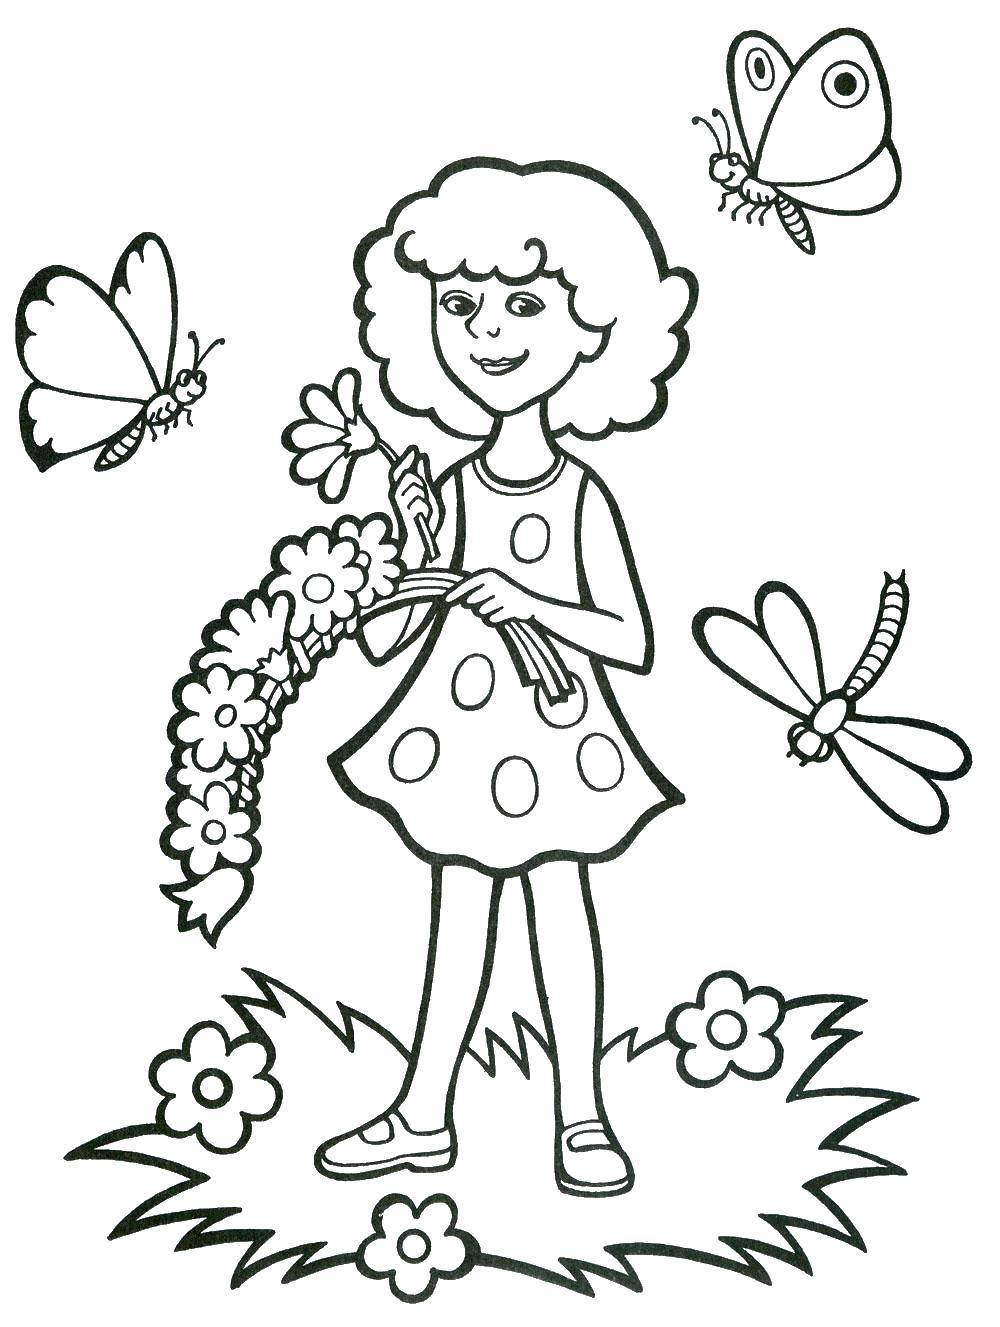 Coloring Girl weaves a wreath. Category Summer. Tags:  summer, girl, flowers, butterflies.